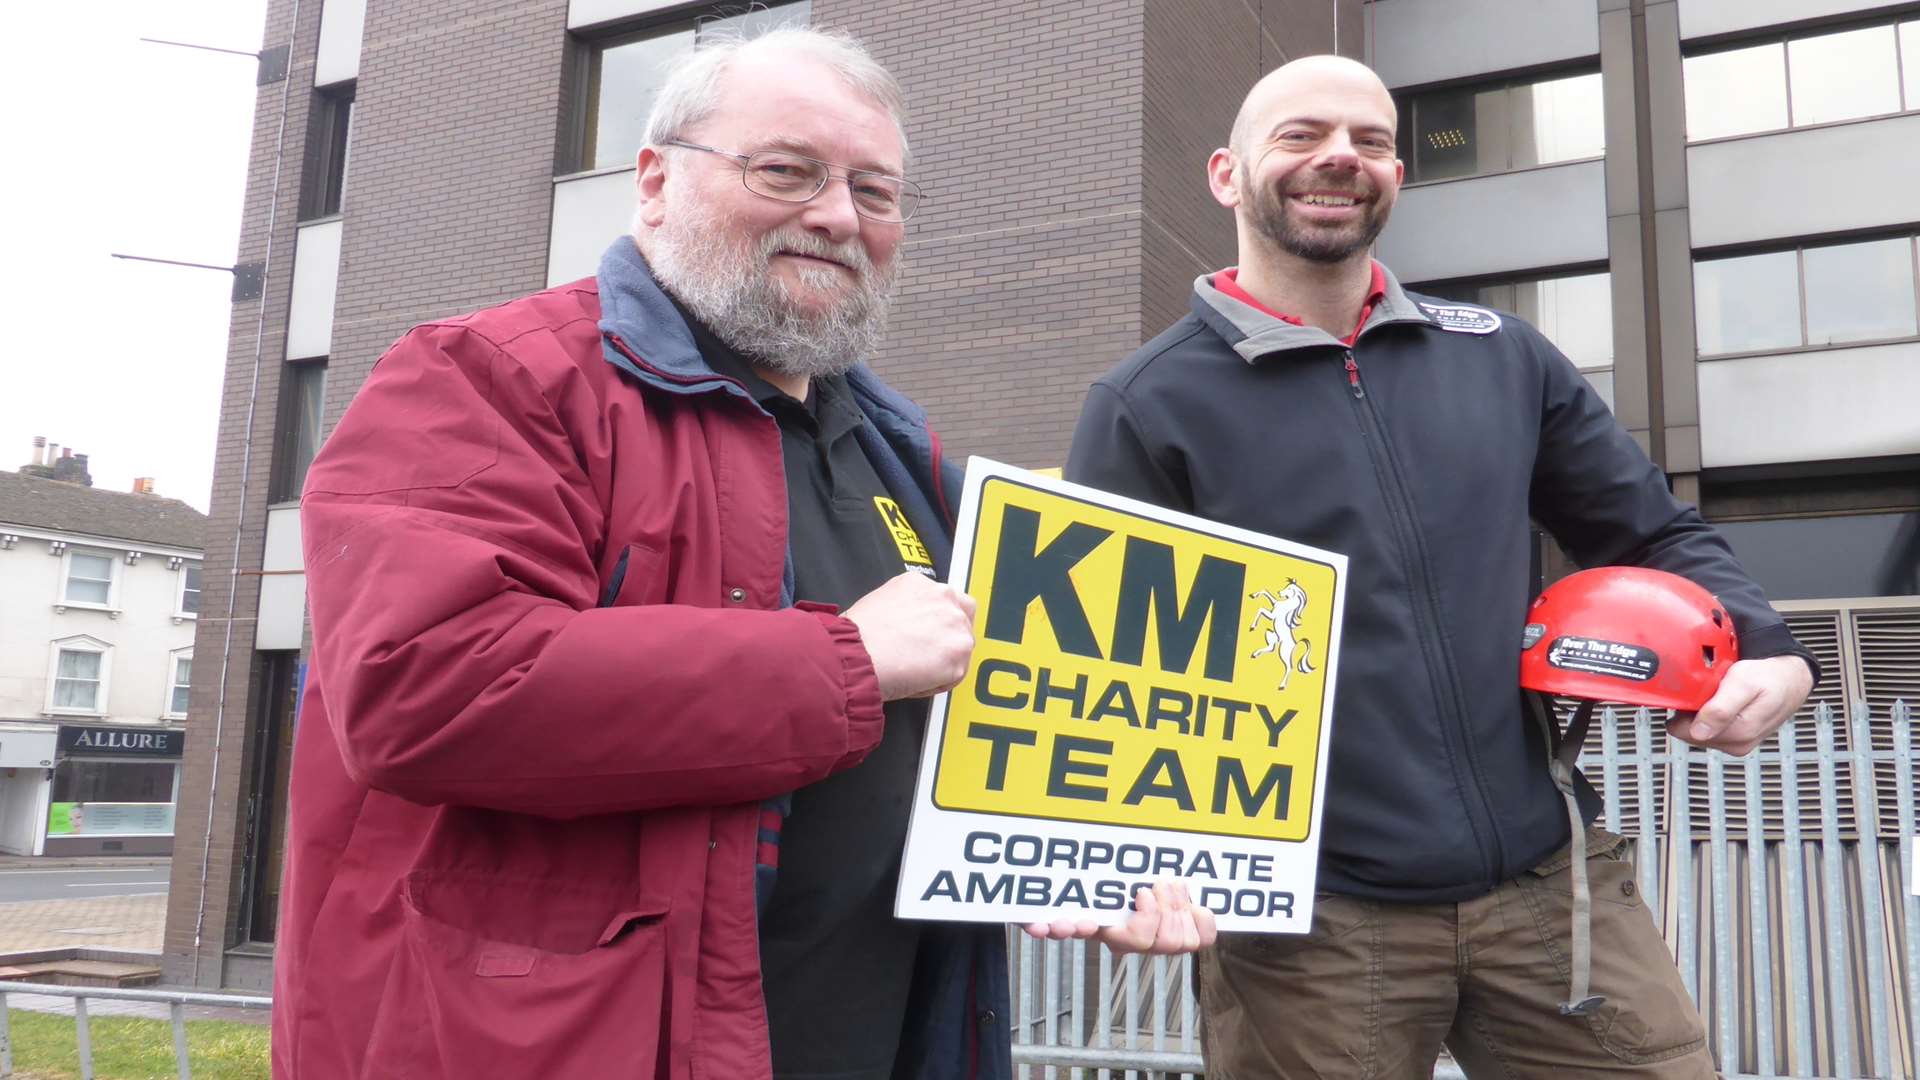 KM Charity Team trustee Stuart Smith with Barry Norton of Over The Edge Adventures, corporate ambassador for the charity.